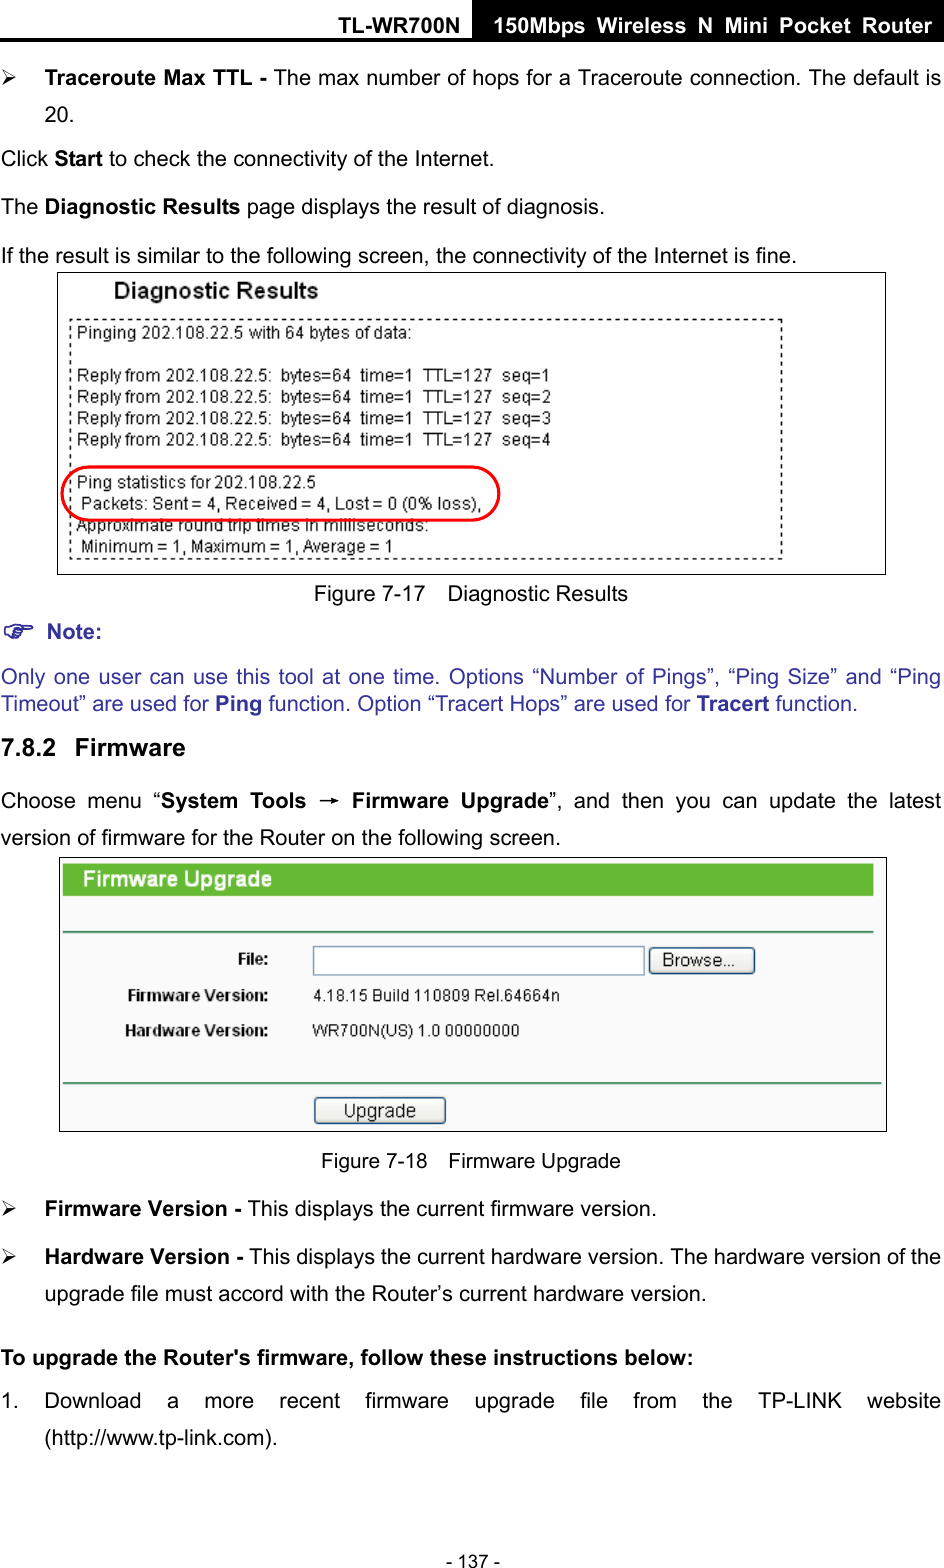 TL-WR700N 150Mbps Wireless N Mini Pocket Router - 137 - ¾ Traceroute Max TTL - The max number of hops for a Traceroute connection. The default is 20. Click Start to check the connectivity of the Internet.   The Diagnostic Results page displays the result of diagnosis. If the result is similar to the following screen, the connectivity of the Internet is fine.  Figure 7-17  Diagnostic Results ) Note: Only one user can use this tool at one time. Options “Number of Pings”, “Ping Size” and “Ping Timeout” are used for Ping function. Option “Tracert Hops” are used for Tracert function. 7.8.2  Firmware Choose menu “System Tools → Firmware Upgrade”, and then you can update the latest version of firmware for the Router on the following screen.  Figure 7-18  Firmware Upgrade ¾ Firmware Version - This displays the current firmware version. ¾ Hardware Version - This displays the current hardware version. The hardware version of the upgrade file must accord with the Router’s current hardware version. To upgrade the Router&apos;s firmware, follow these instructions below: 1. Download a more recent firmware upgrade file from the TP-LINK website (http://www.tp-link.com).  